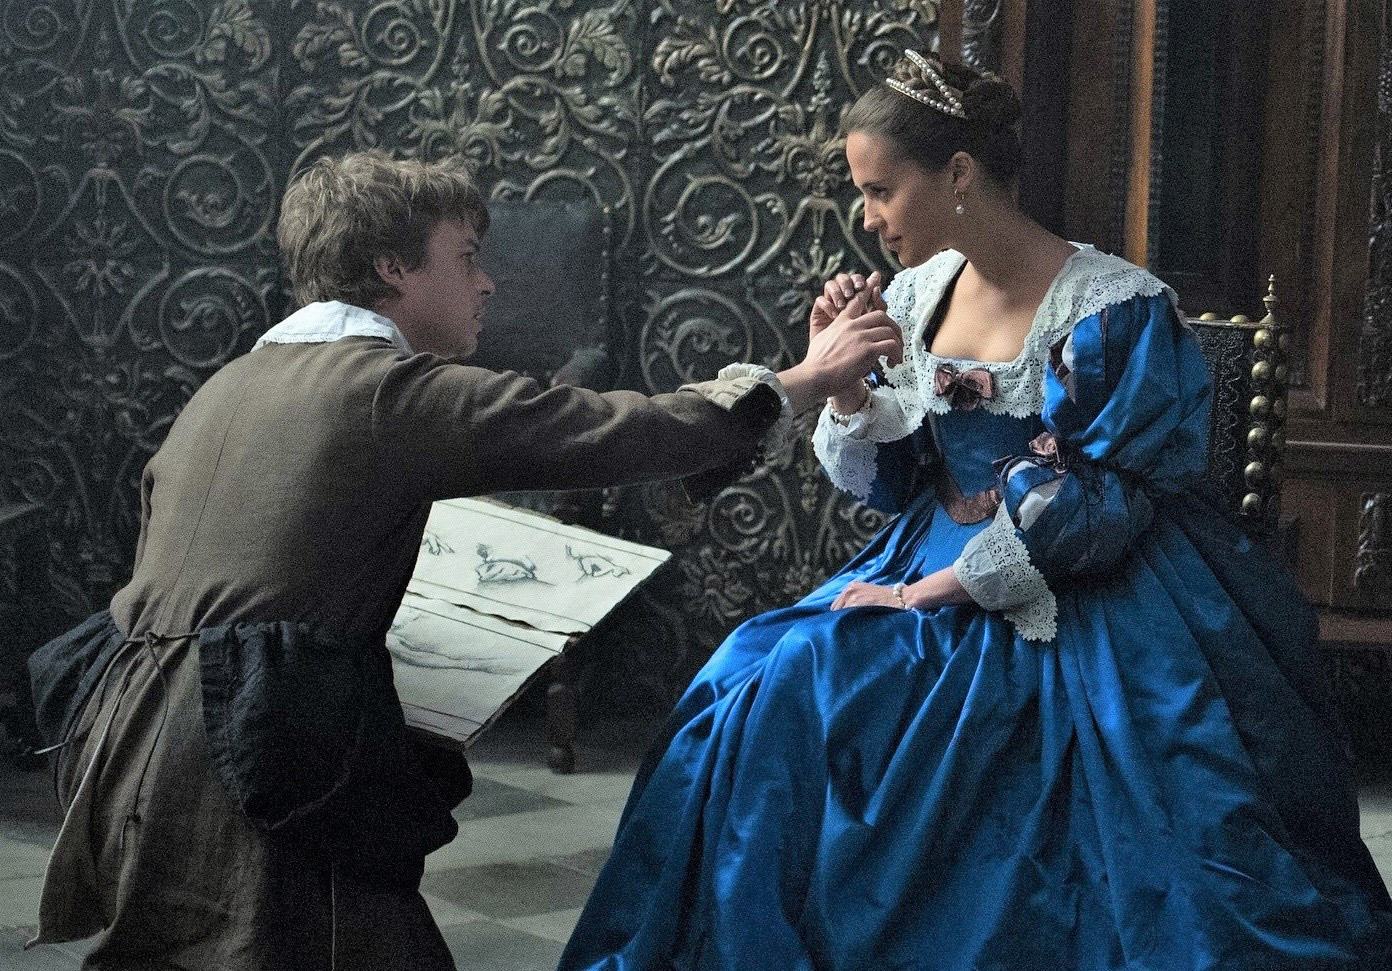 (C) 2017 TULIP FEVER FILMS LTD.  ALL RIGHTS RESERVED.